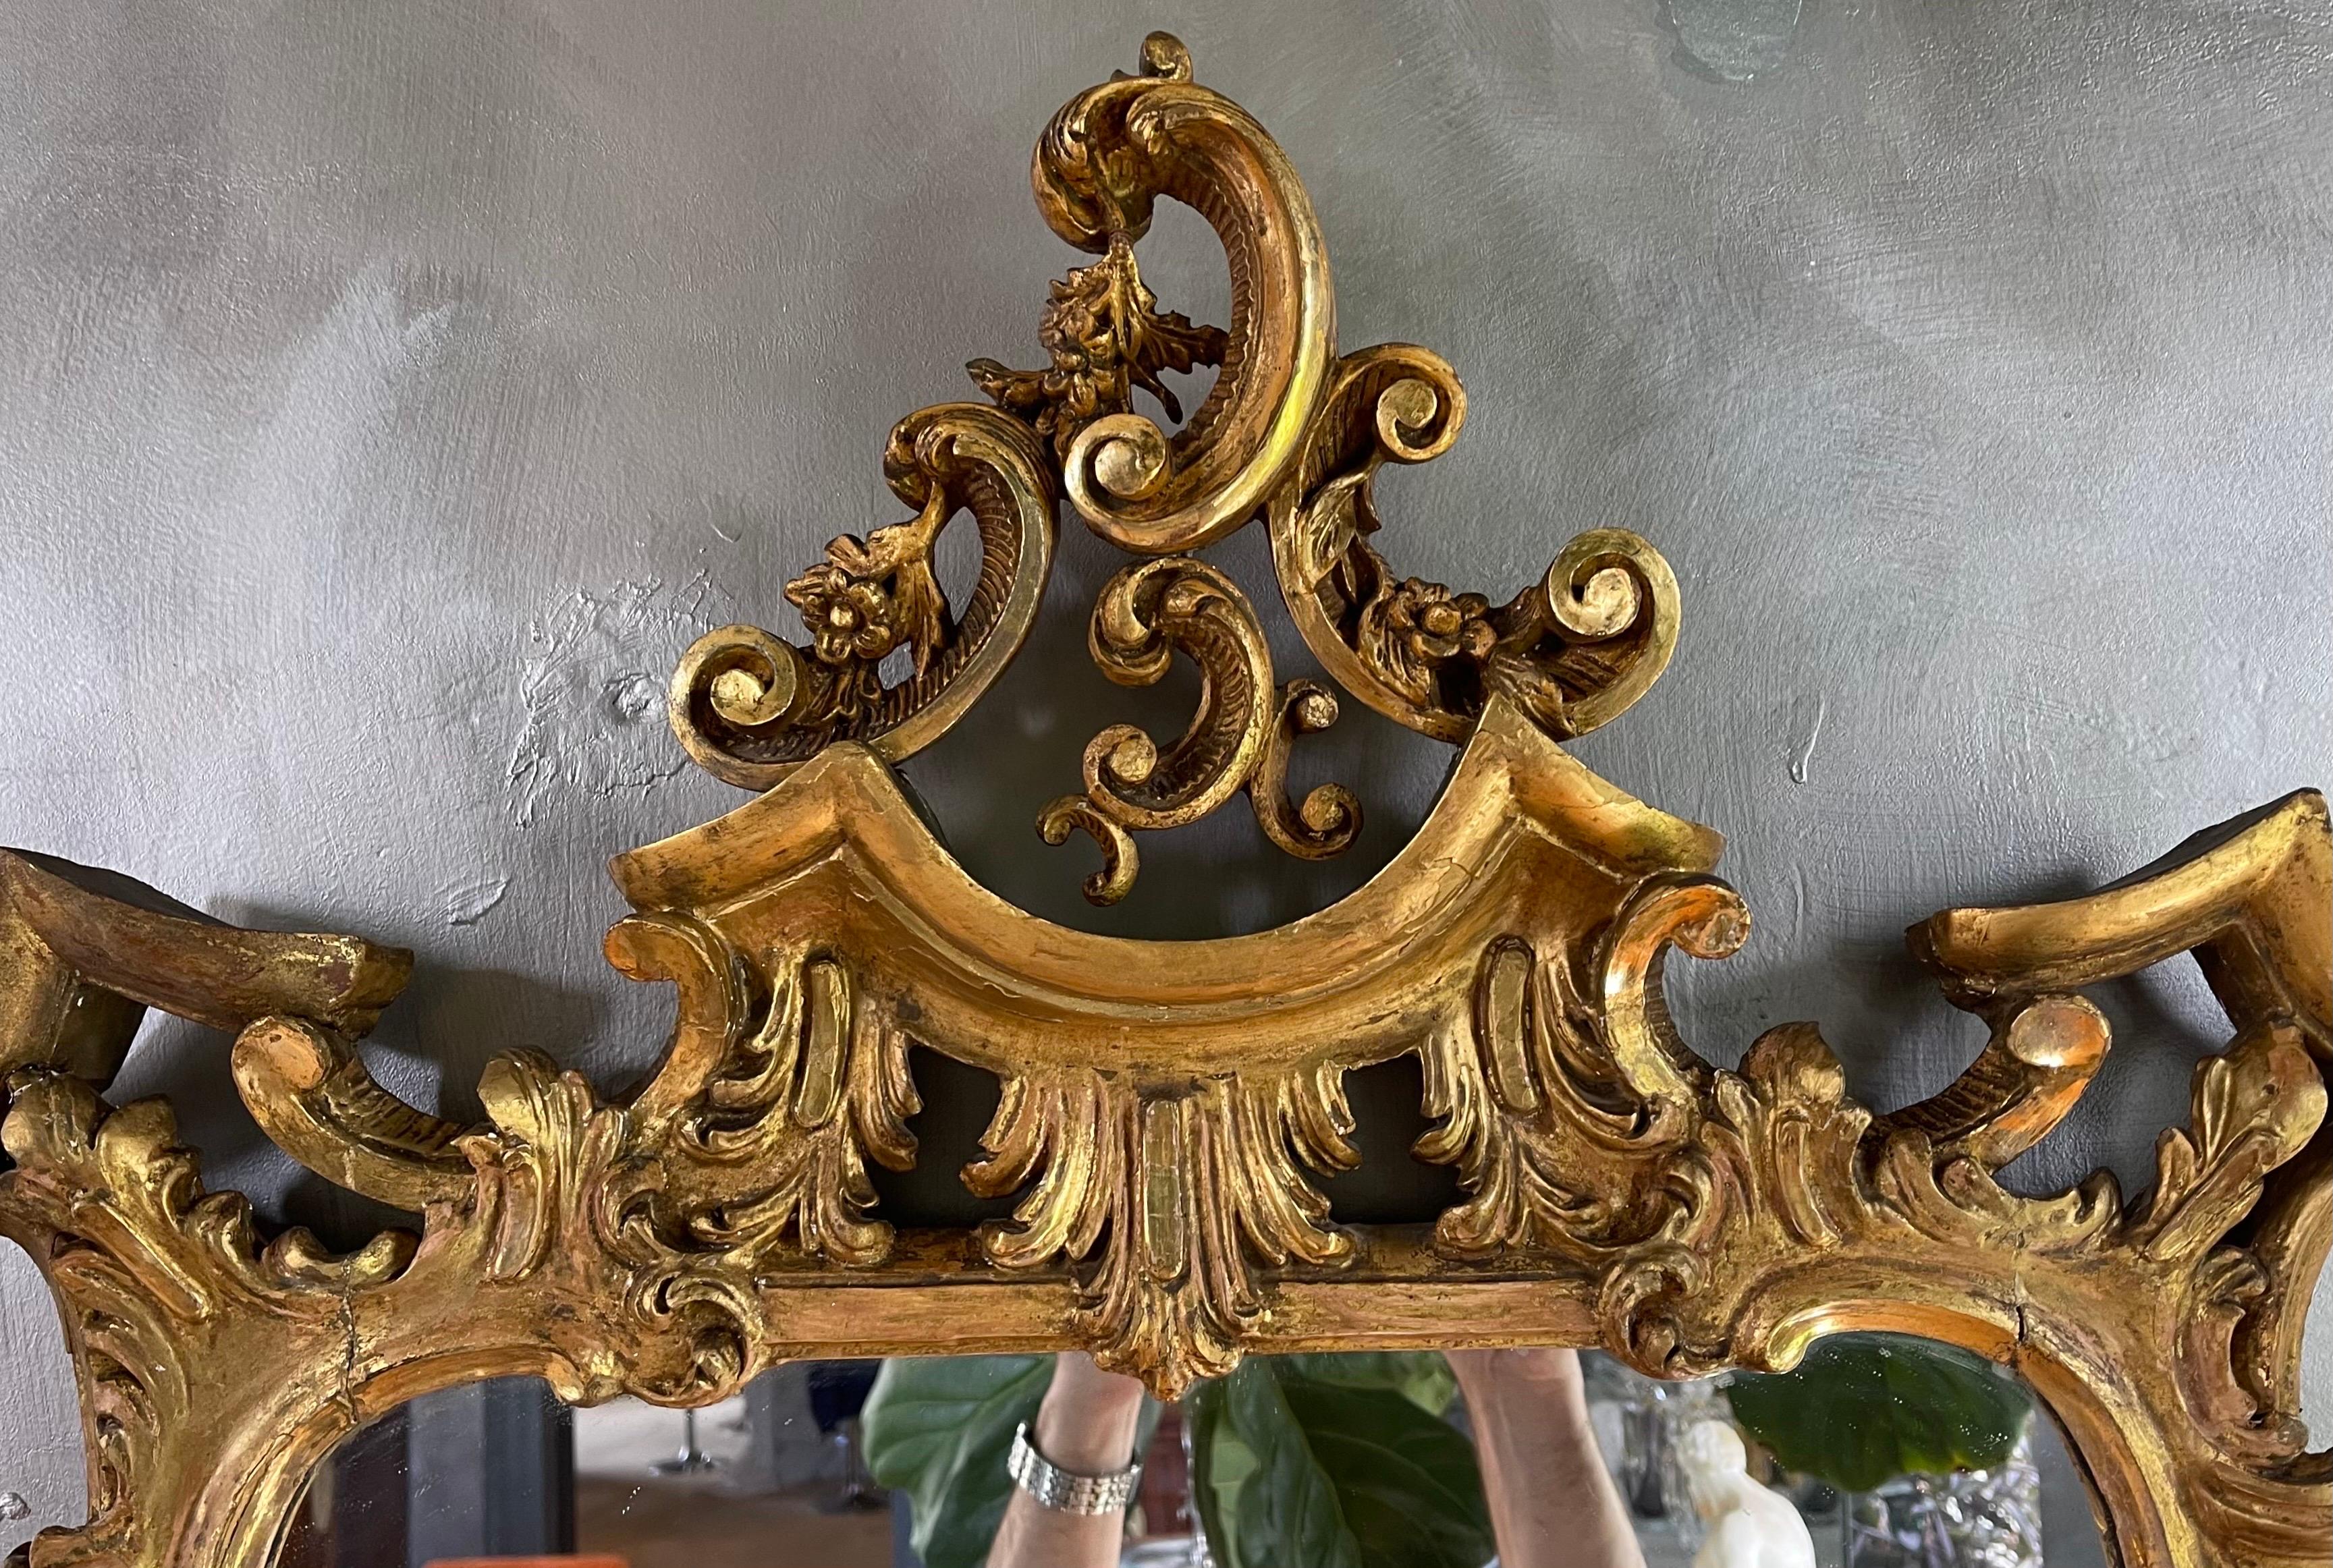 A very fine 18th century Chinese Chippendale looking glass. The foliate design incorporates three dimensional roses wrapping around columns and Rococo C-Curves finished in pagoda tops. It retains original 24k Guilding and desirable light terracotta